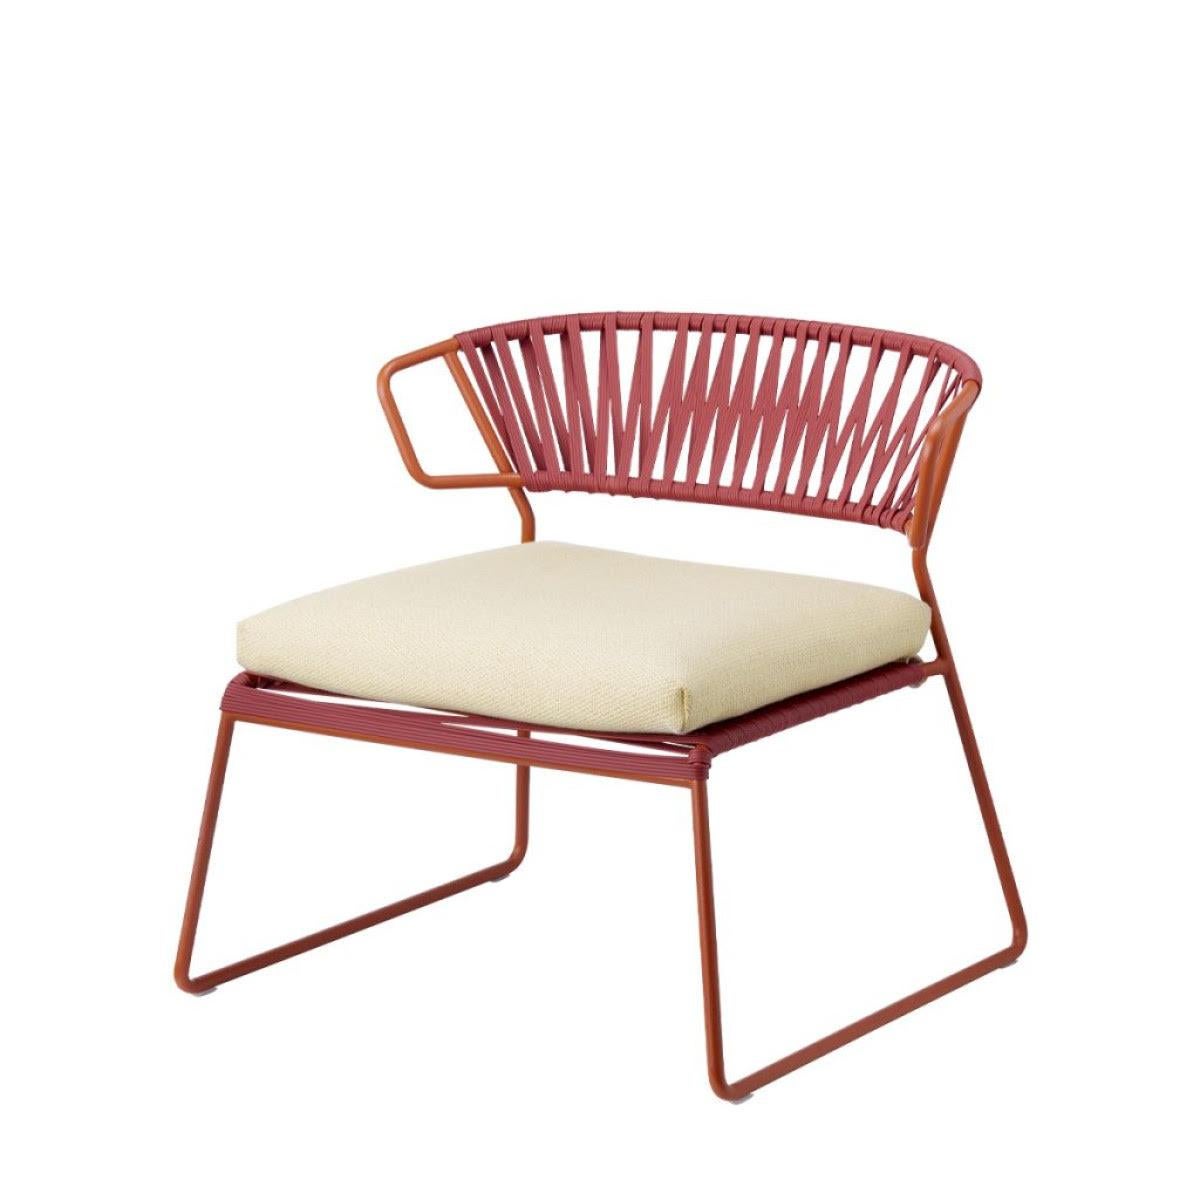 Modern Pink Terracotta Armchair Outdoor or Indoor in Metal and Ropes, 21 century For Sale 2